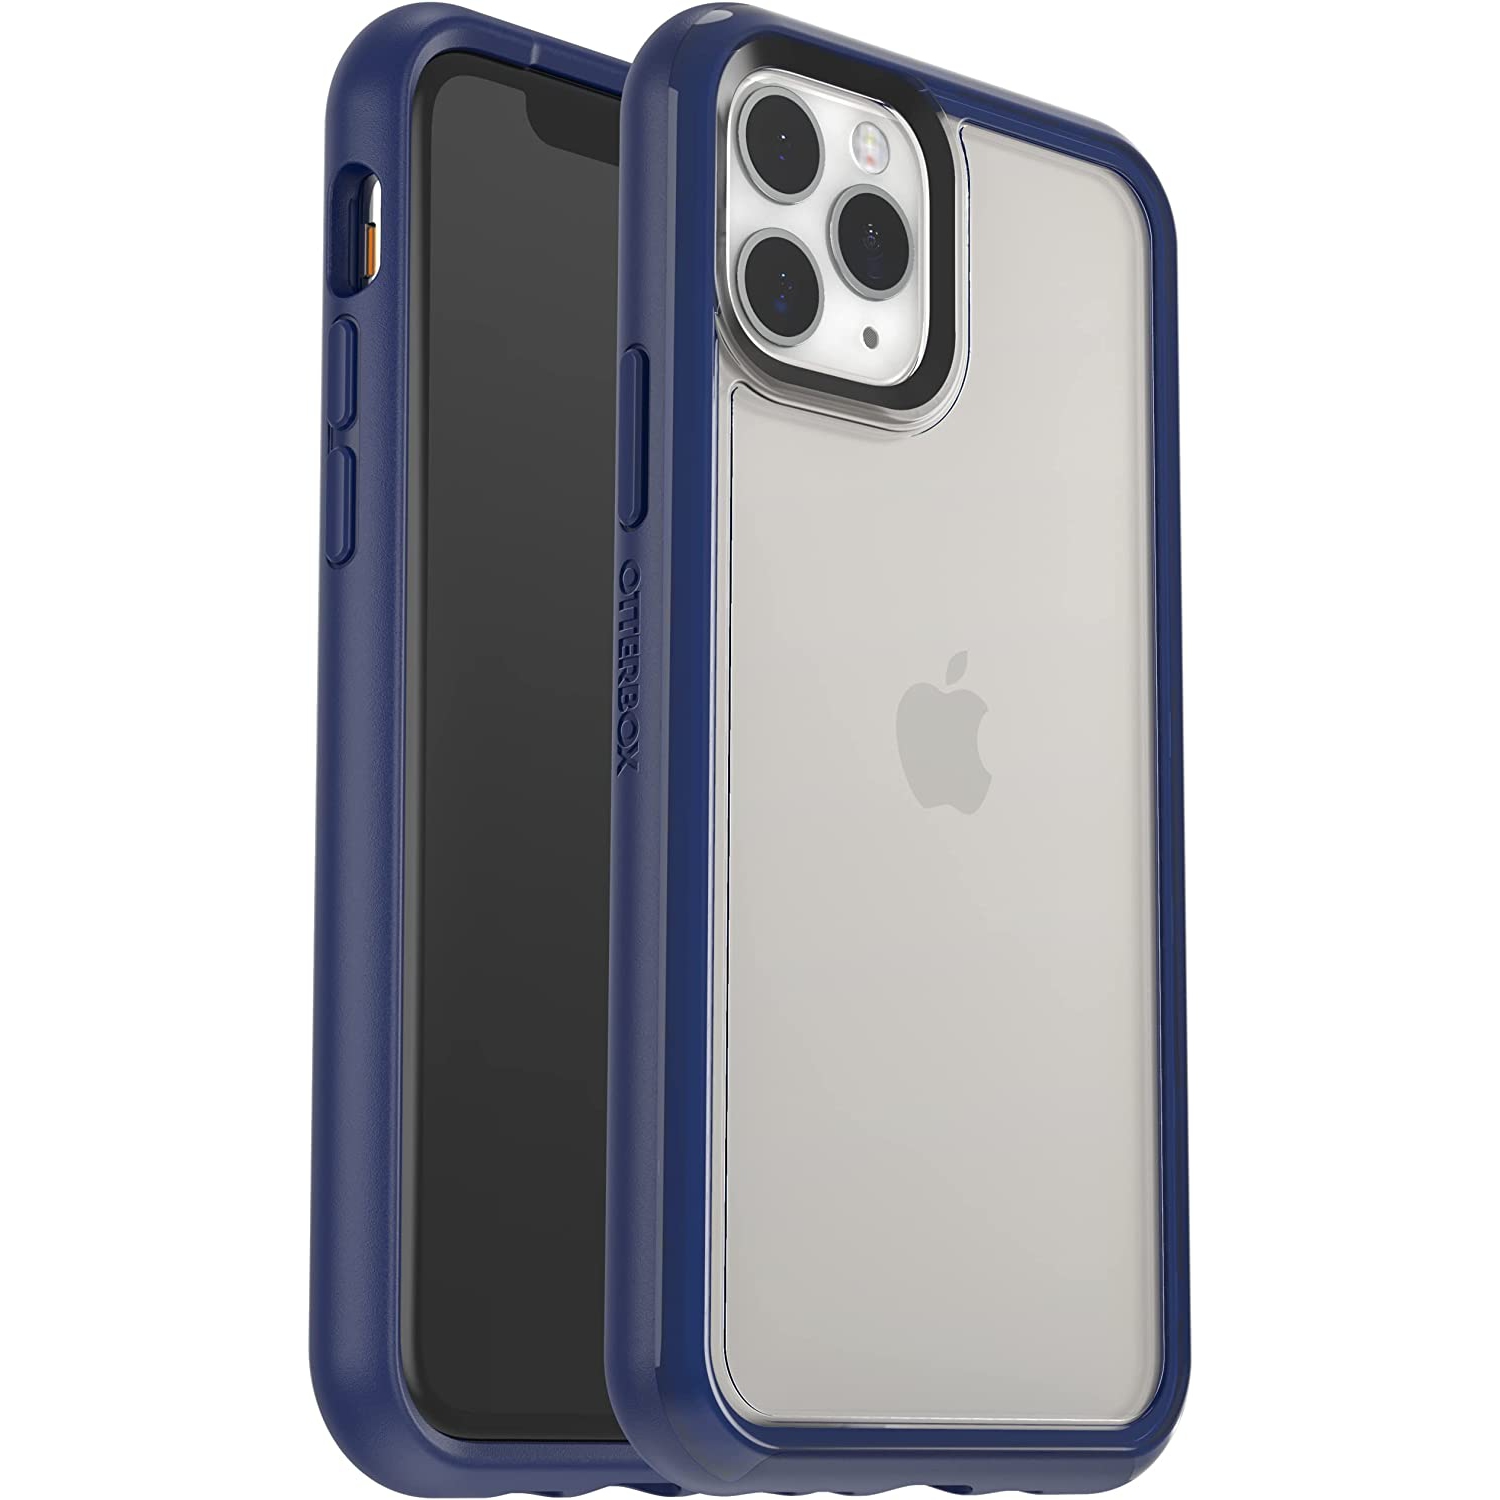 OtterBox Clear Protective Case for iPhone 11 Pro, Indigo Bliss